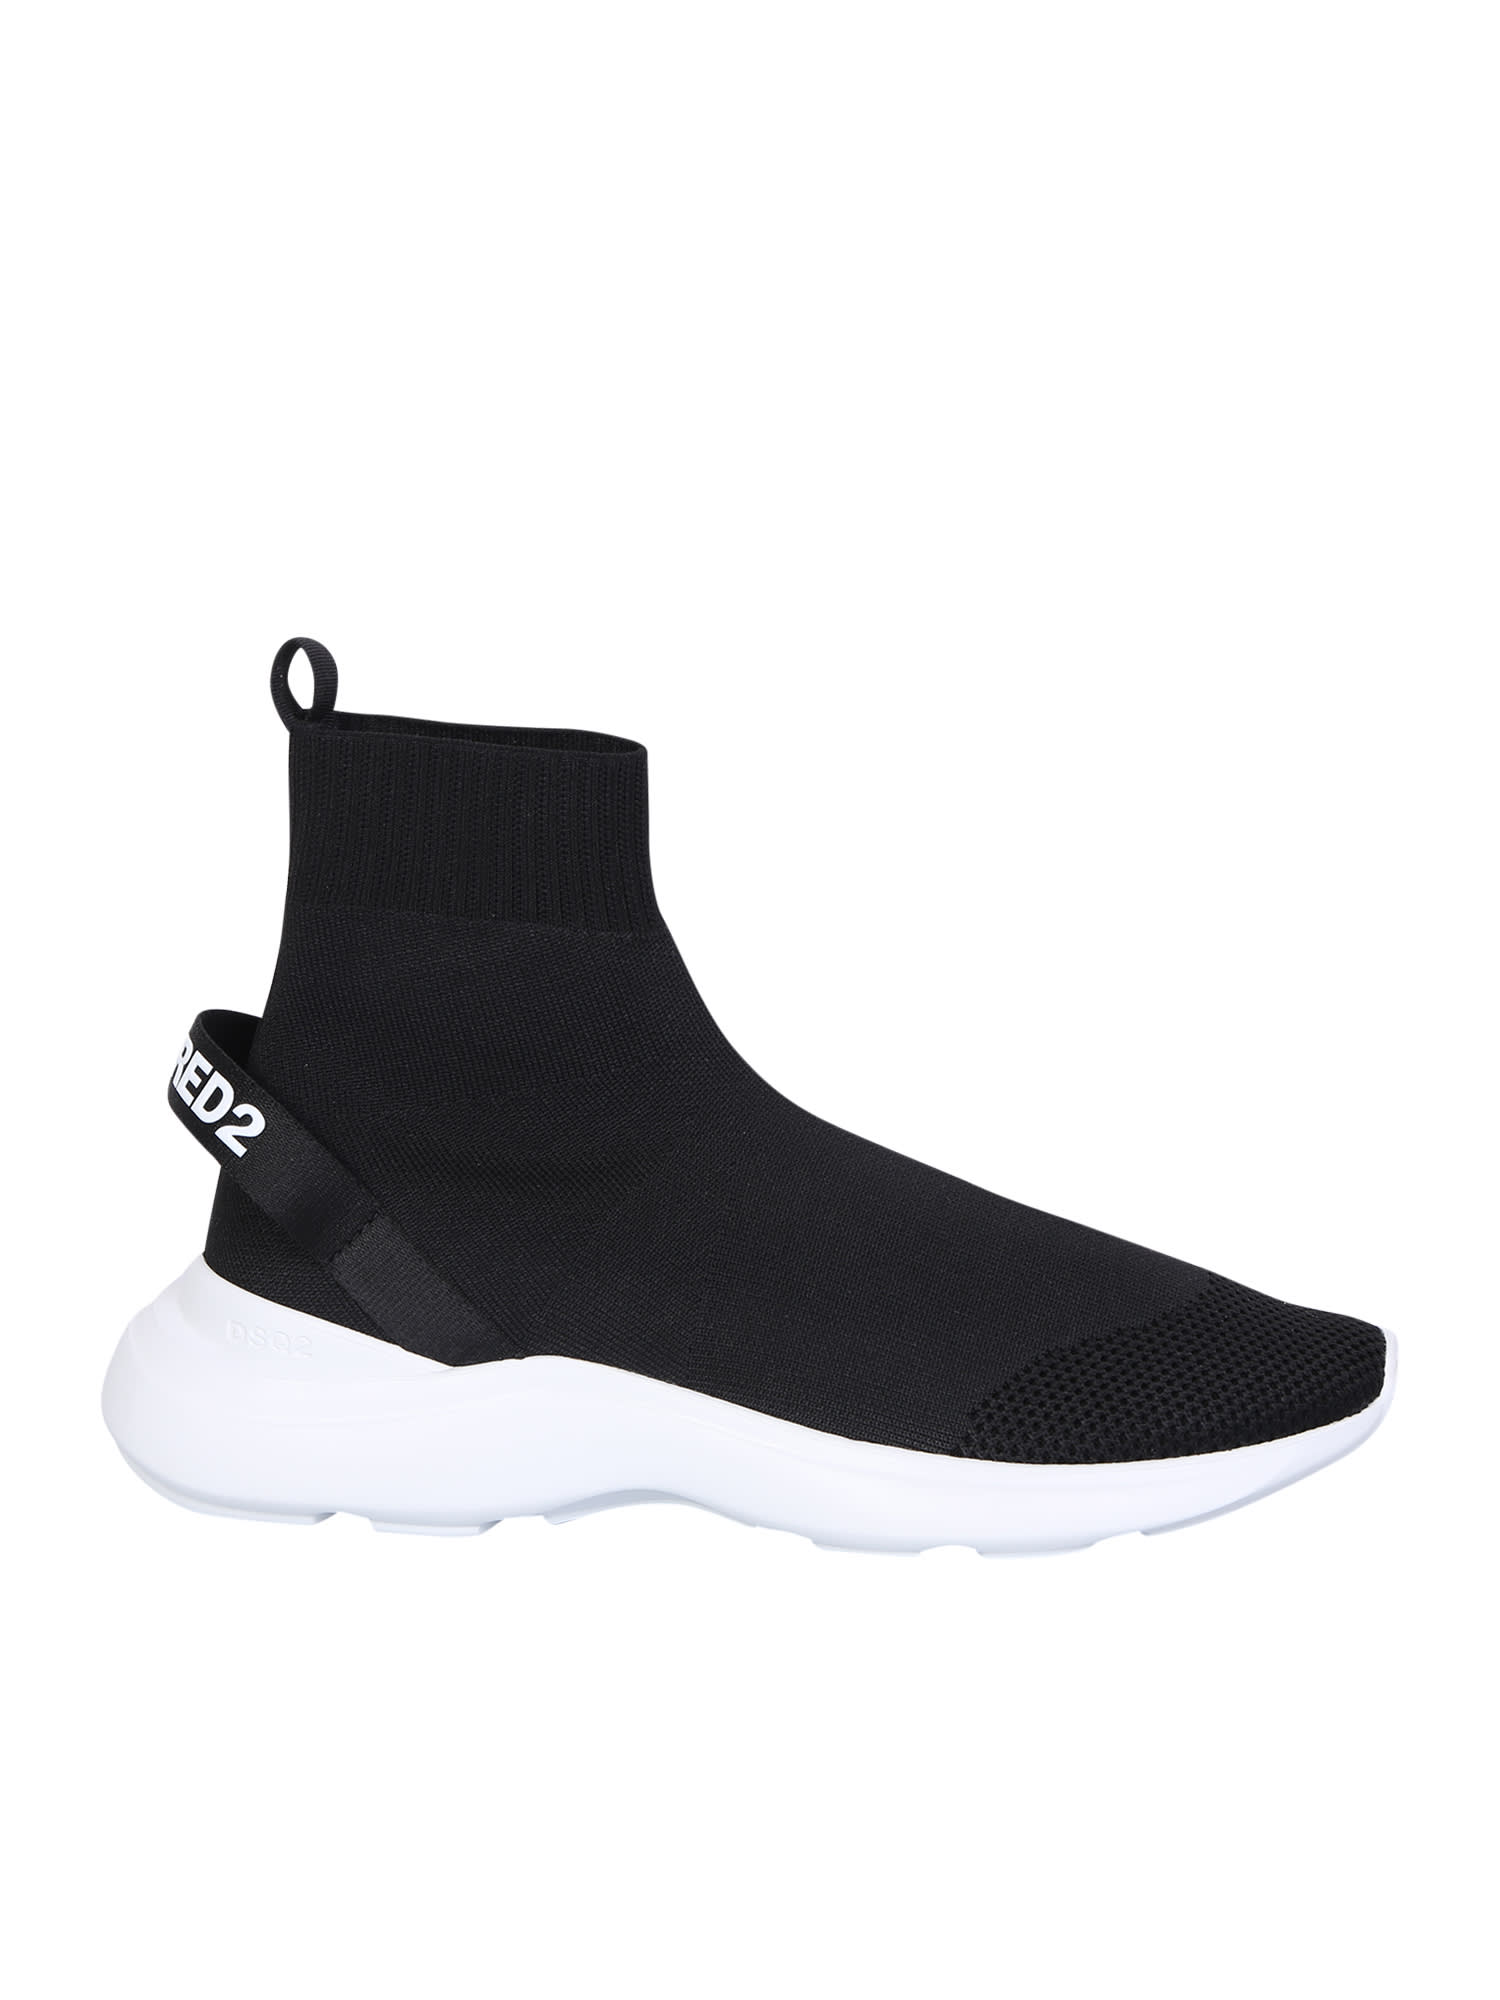 Shop Dsquared2 Black Fly Sneakers